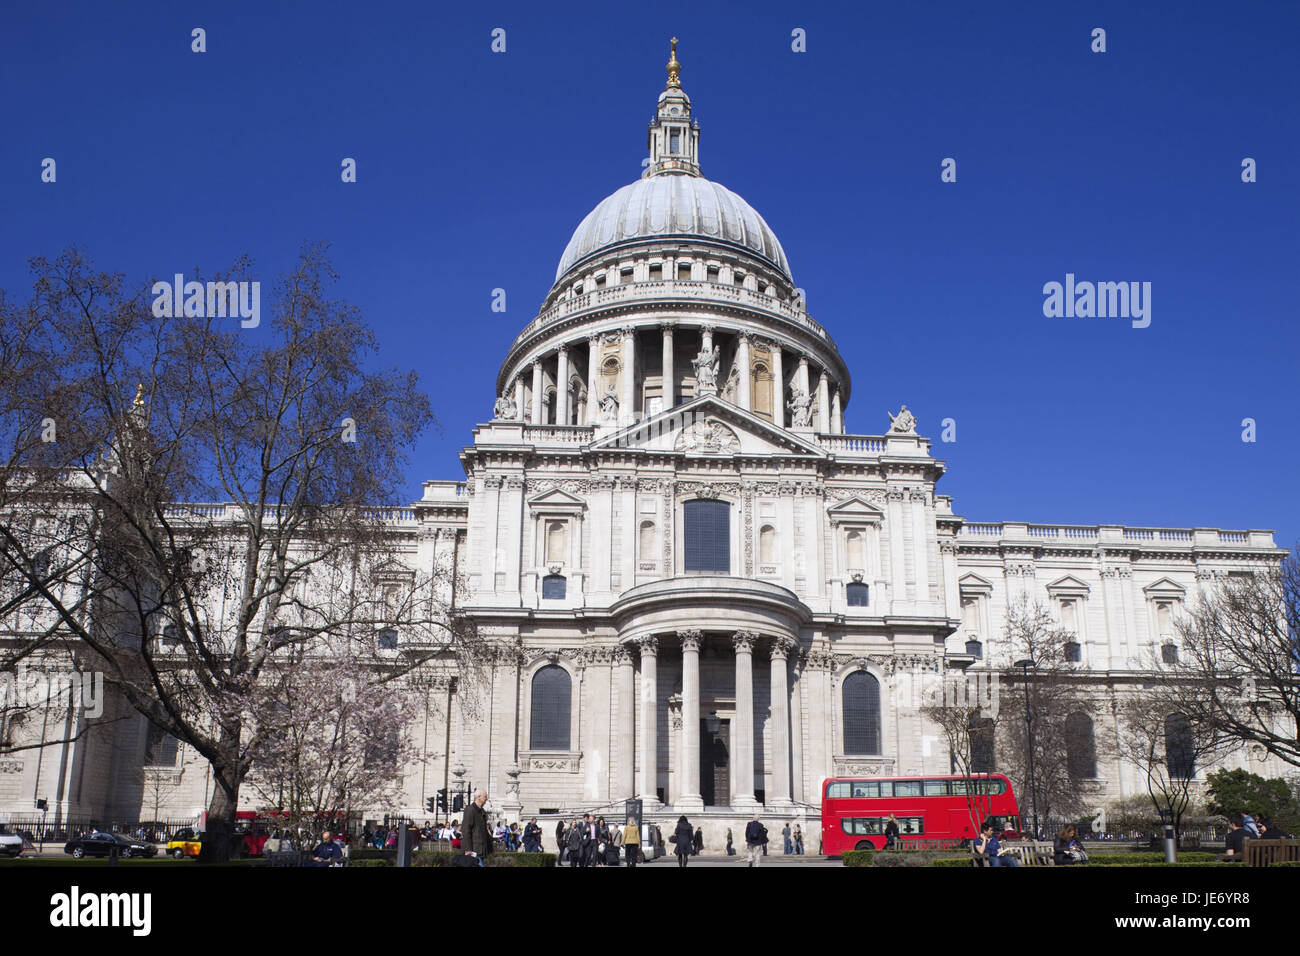 England, London, St. Paul's cathedral, outside, UK, GB, cathedral, church, building, new building, religion, faith, Christianity, architecture, dome, place of interest, tourism, person, tourist, sky, blue, Stock Photo